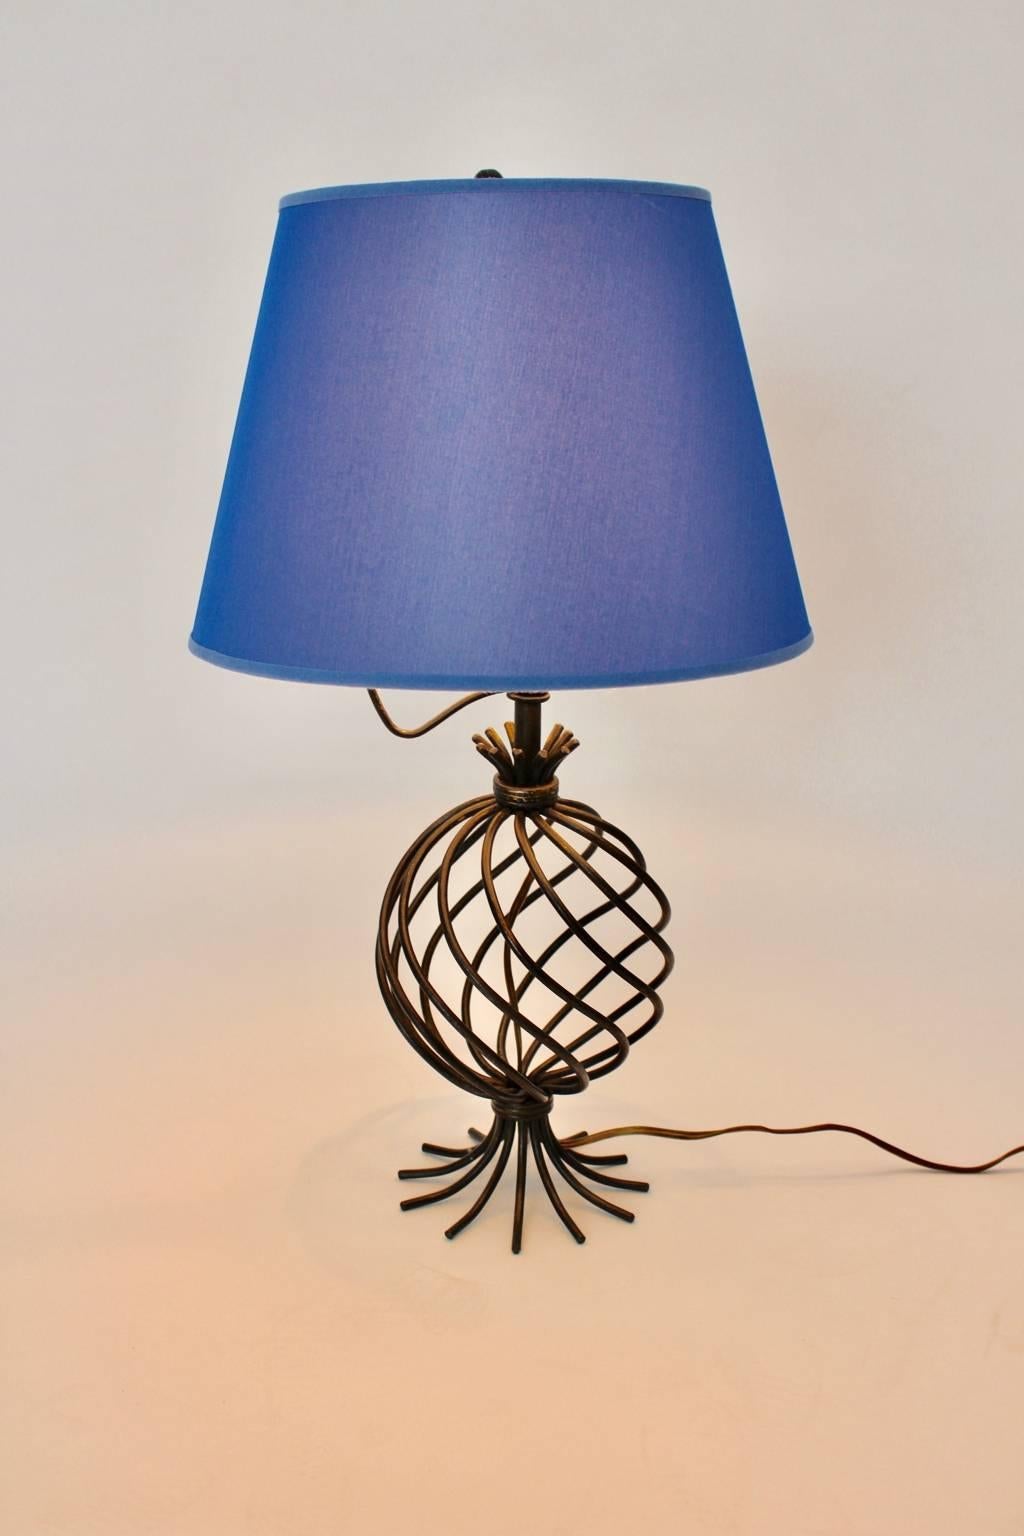 Mid century modern vintage metal table lamp in the style of jean Royere with a renewed blue textile fabric lamp shade and a round metal black lacquered base
The table lamp lights with one E 27 bulb and has an on/off switch.
estimate